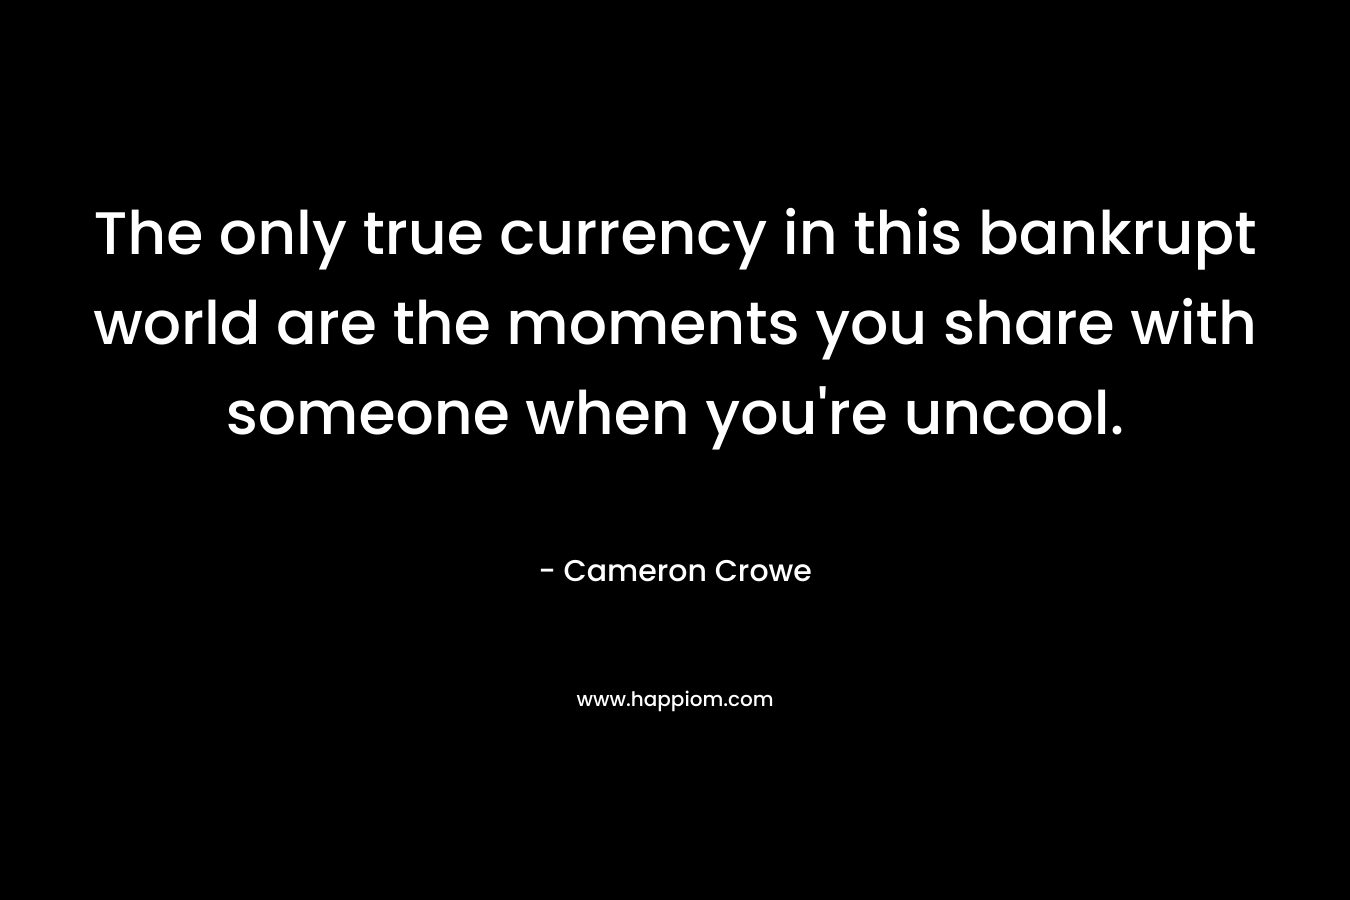 The only true currency in this bankrupt world are the moments you share with someone when you’re uncool. – Cameron Crowe